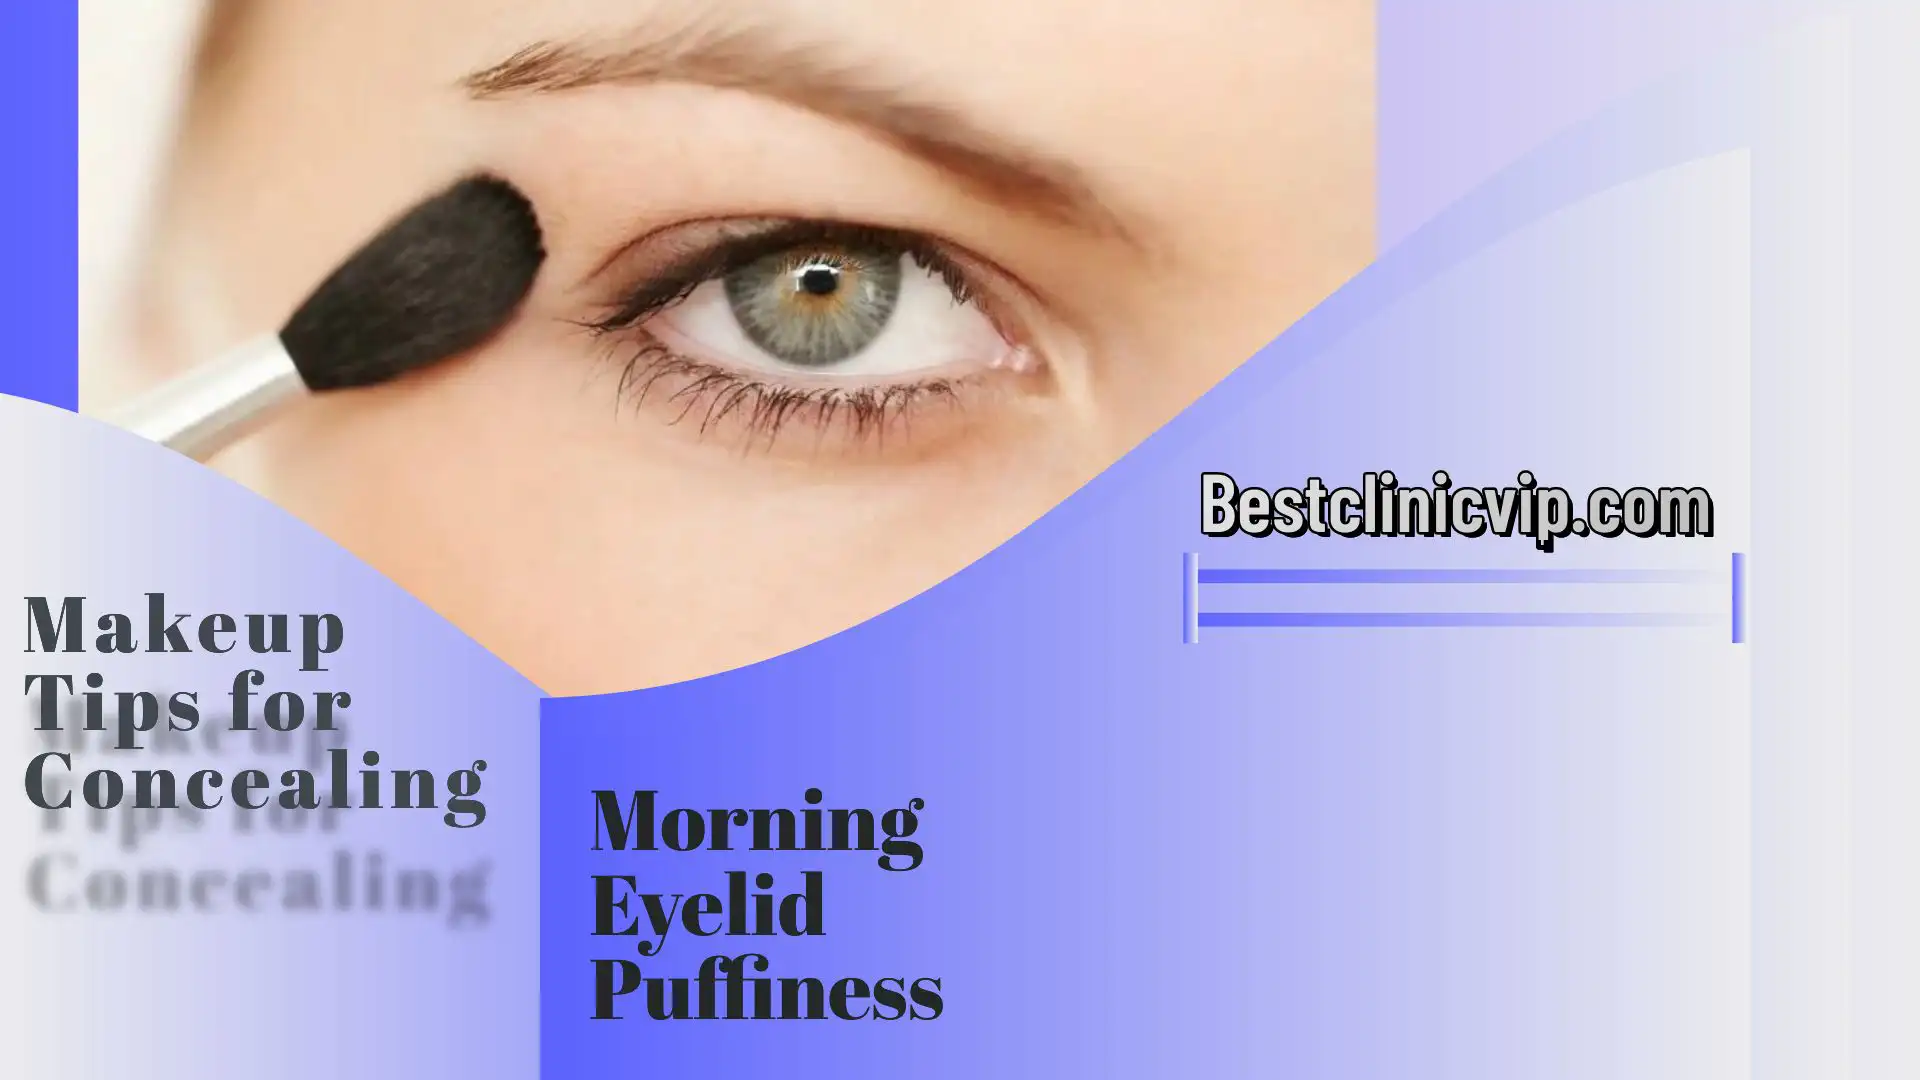 Makeup Tips for Concealing Morning Eyelid Puffiness